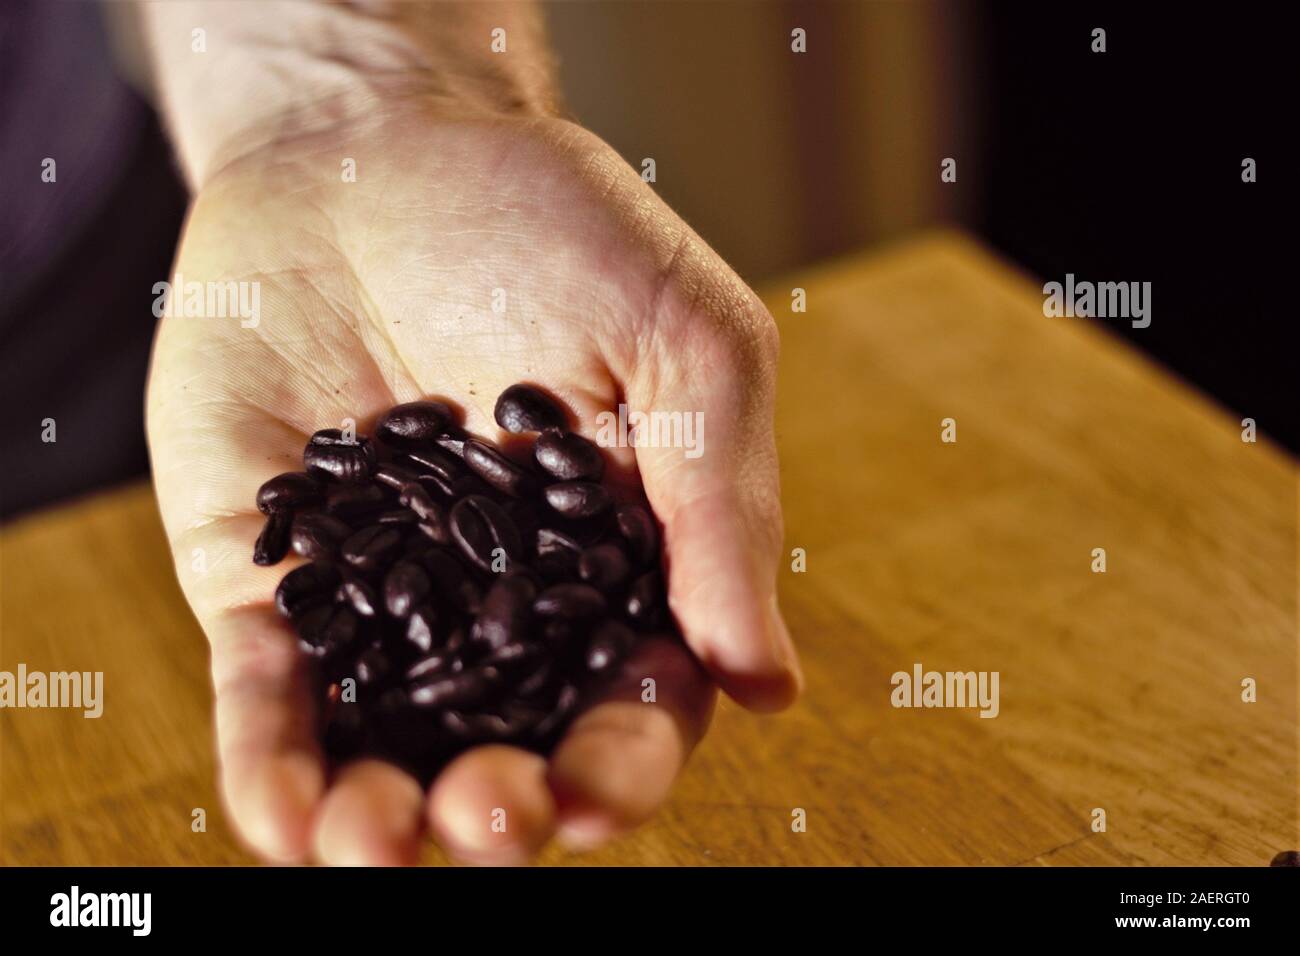 White hand holding Coffee beans excentrée Banque D'Images